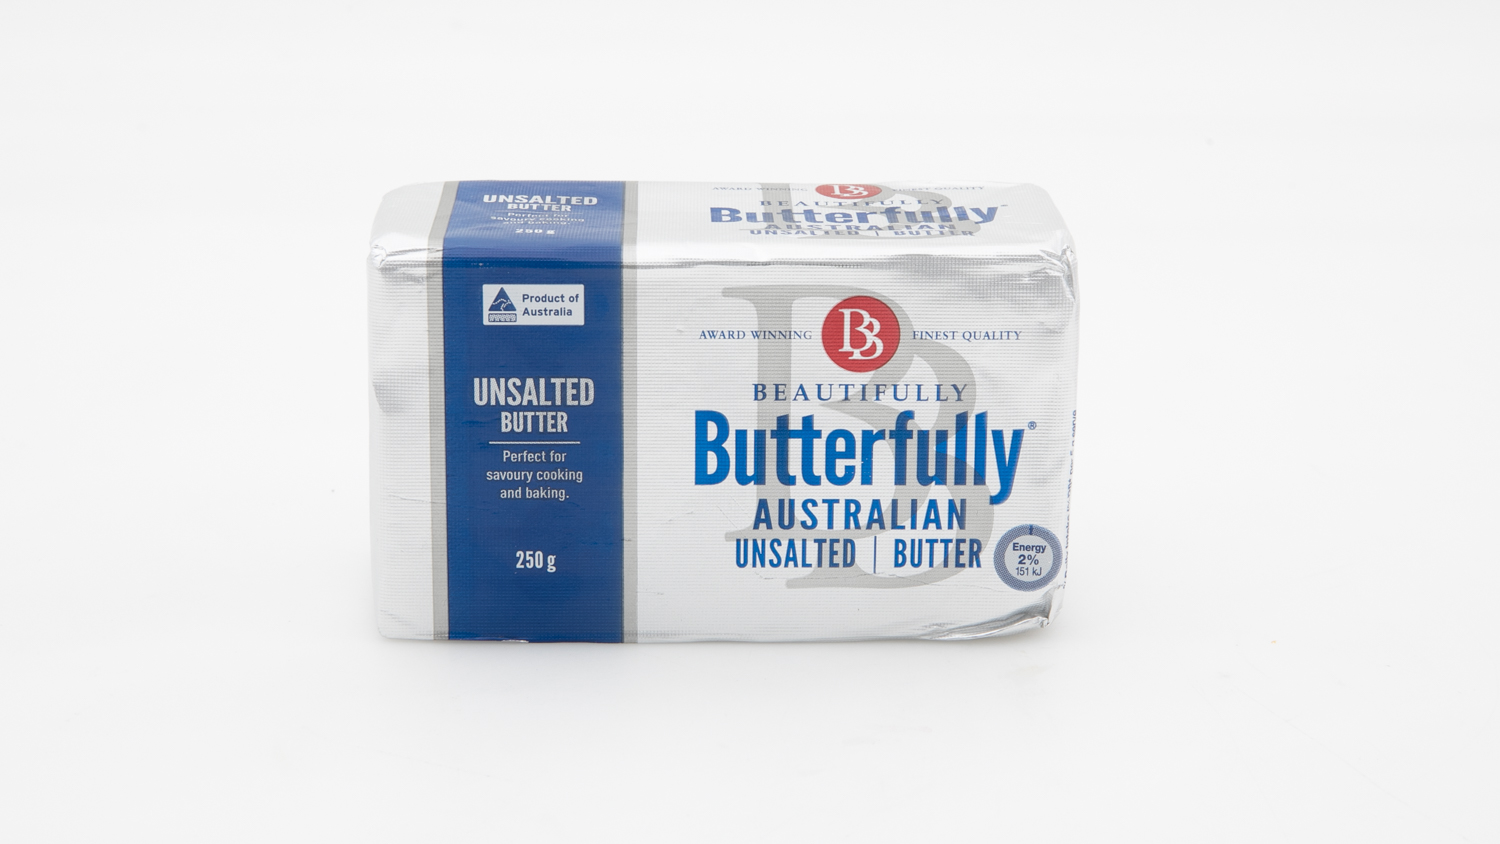 Aldi Beautifully Butterfully Unsalted carousel image